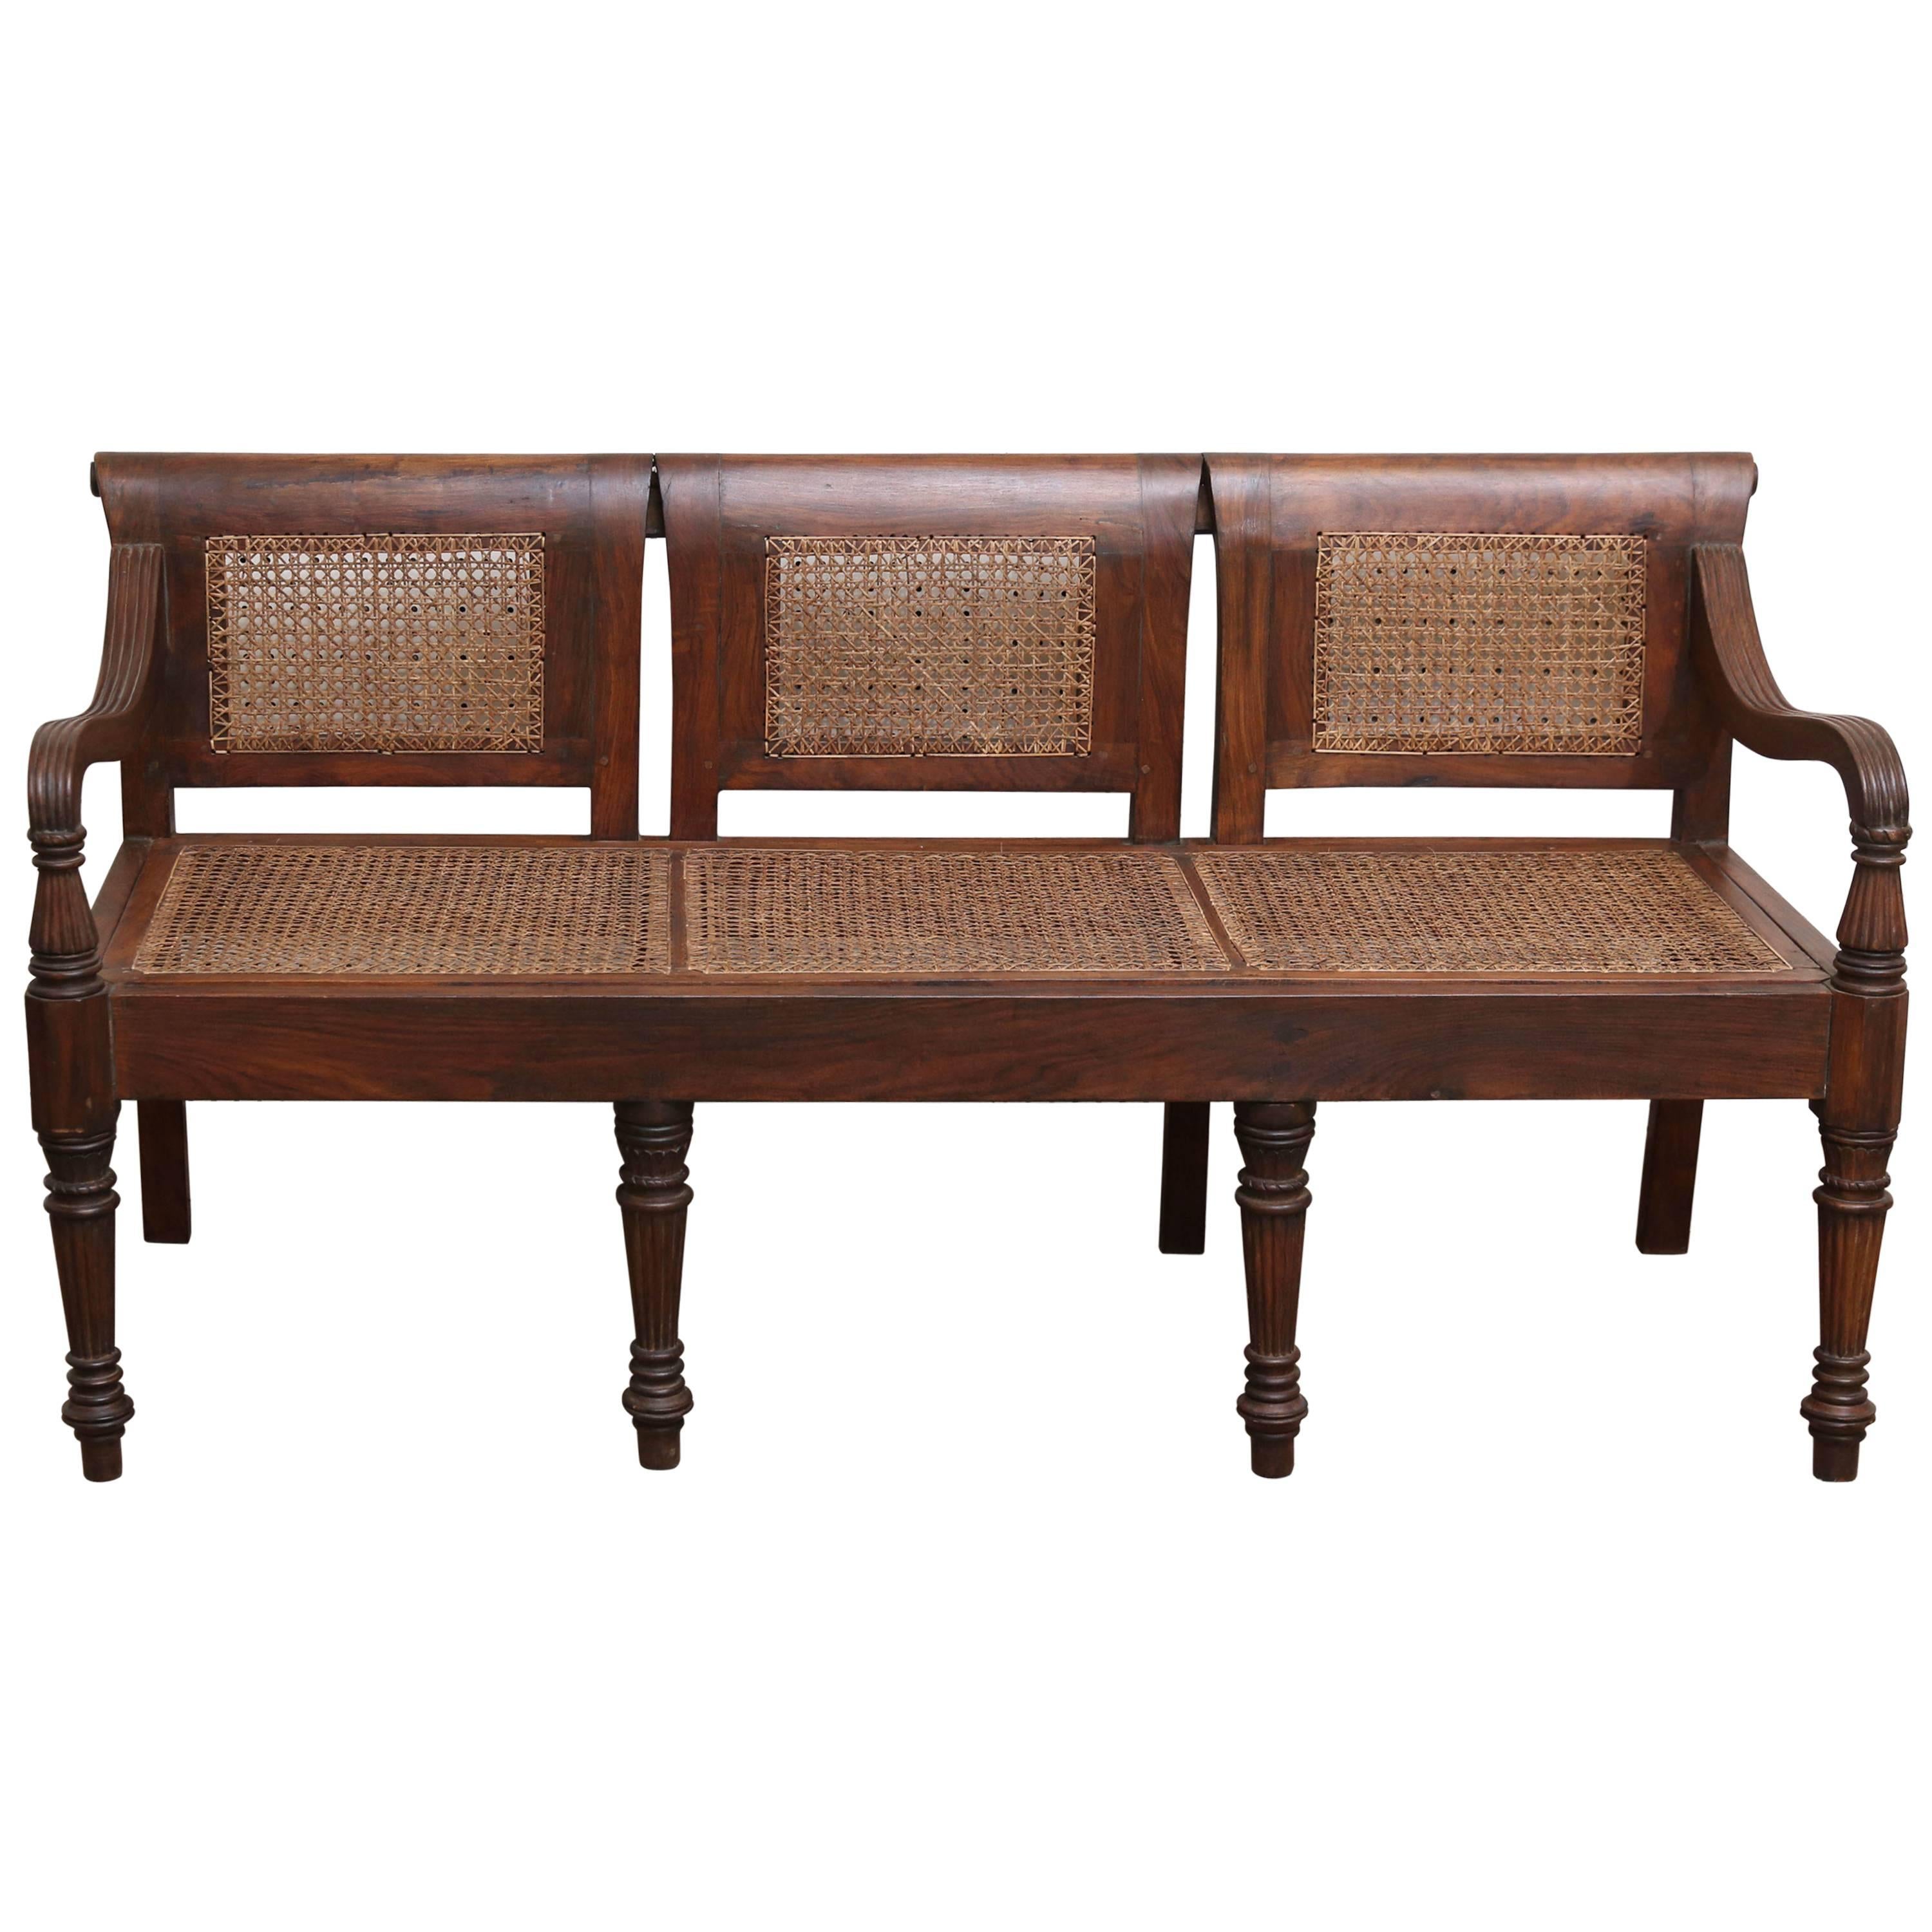 1920s Solid Teakwood and Cane British Colonial Bench from a Tea Plantation